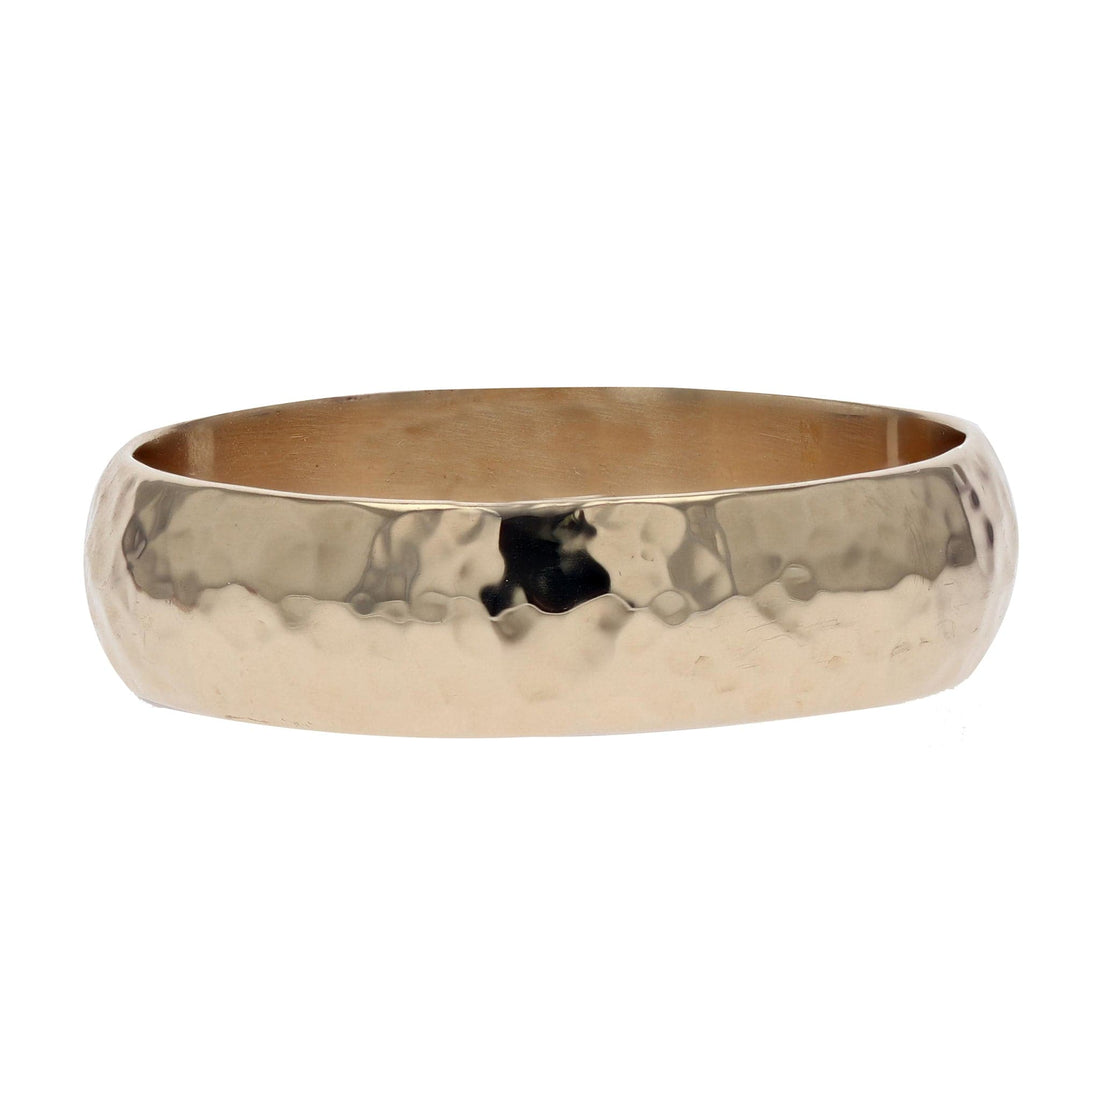 14k Yellow Gold Hammered Band - Skeie's Jewelers